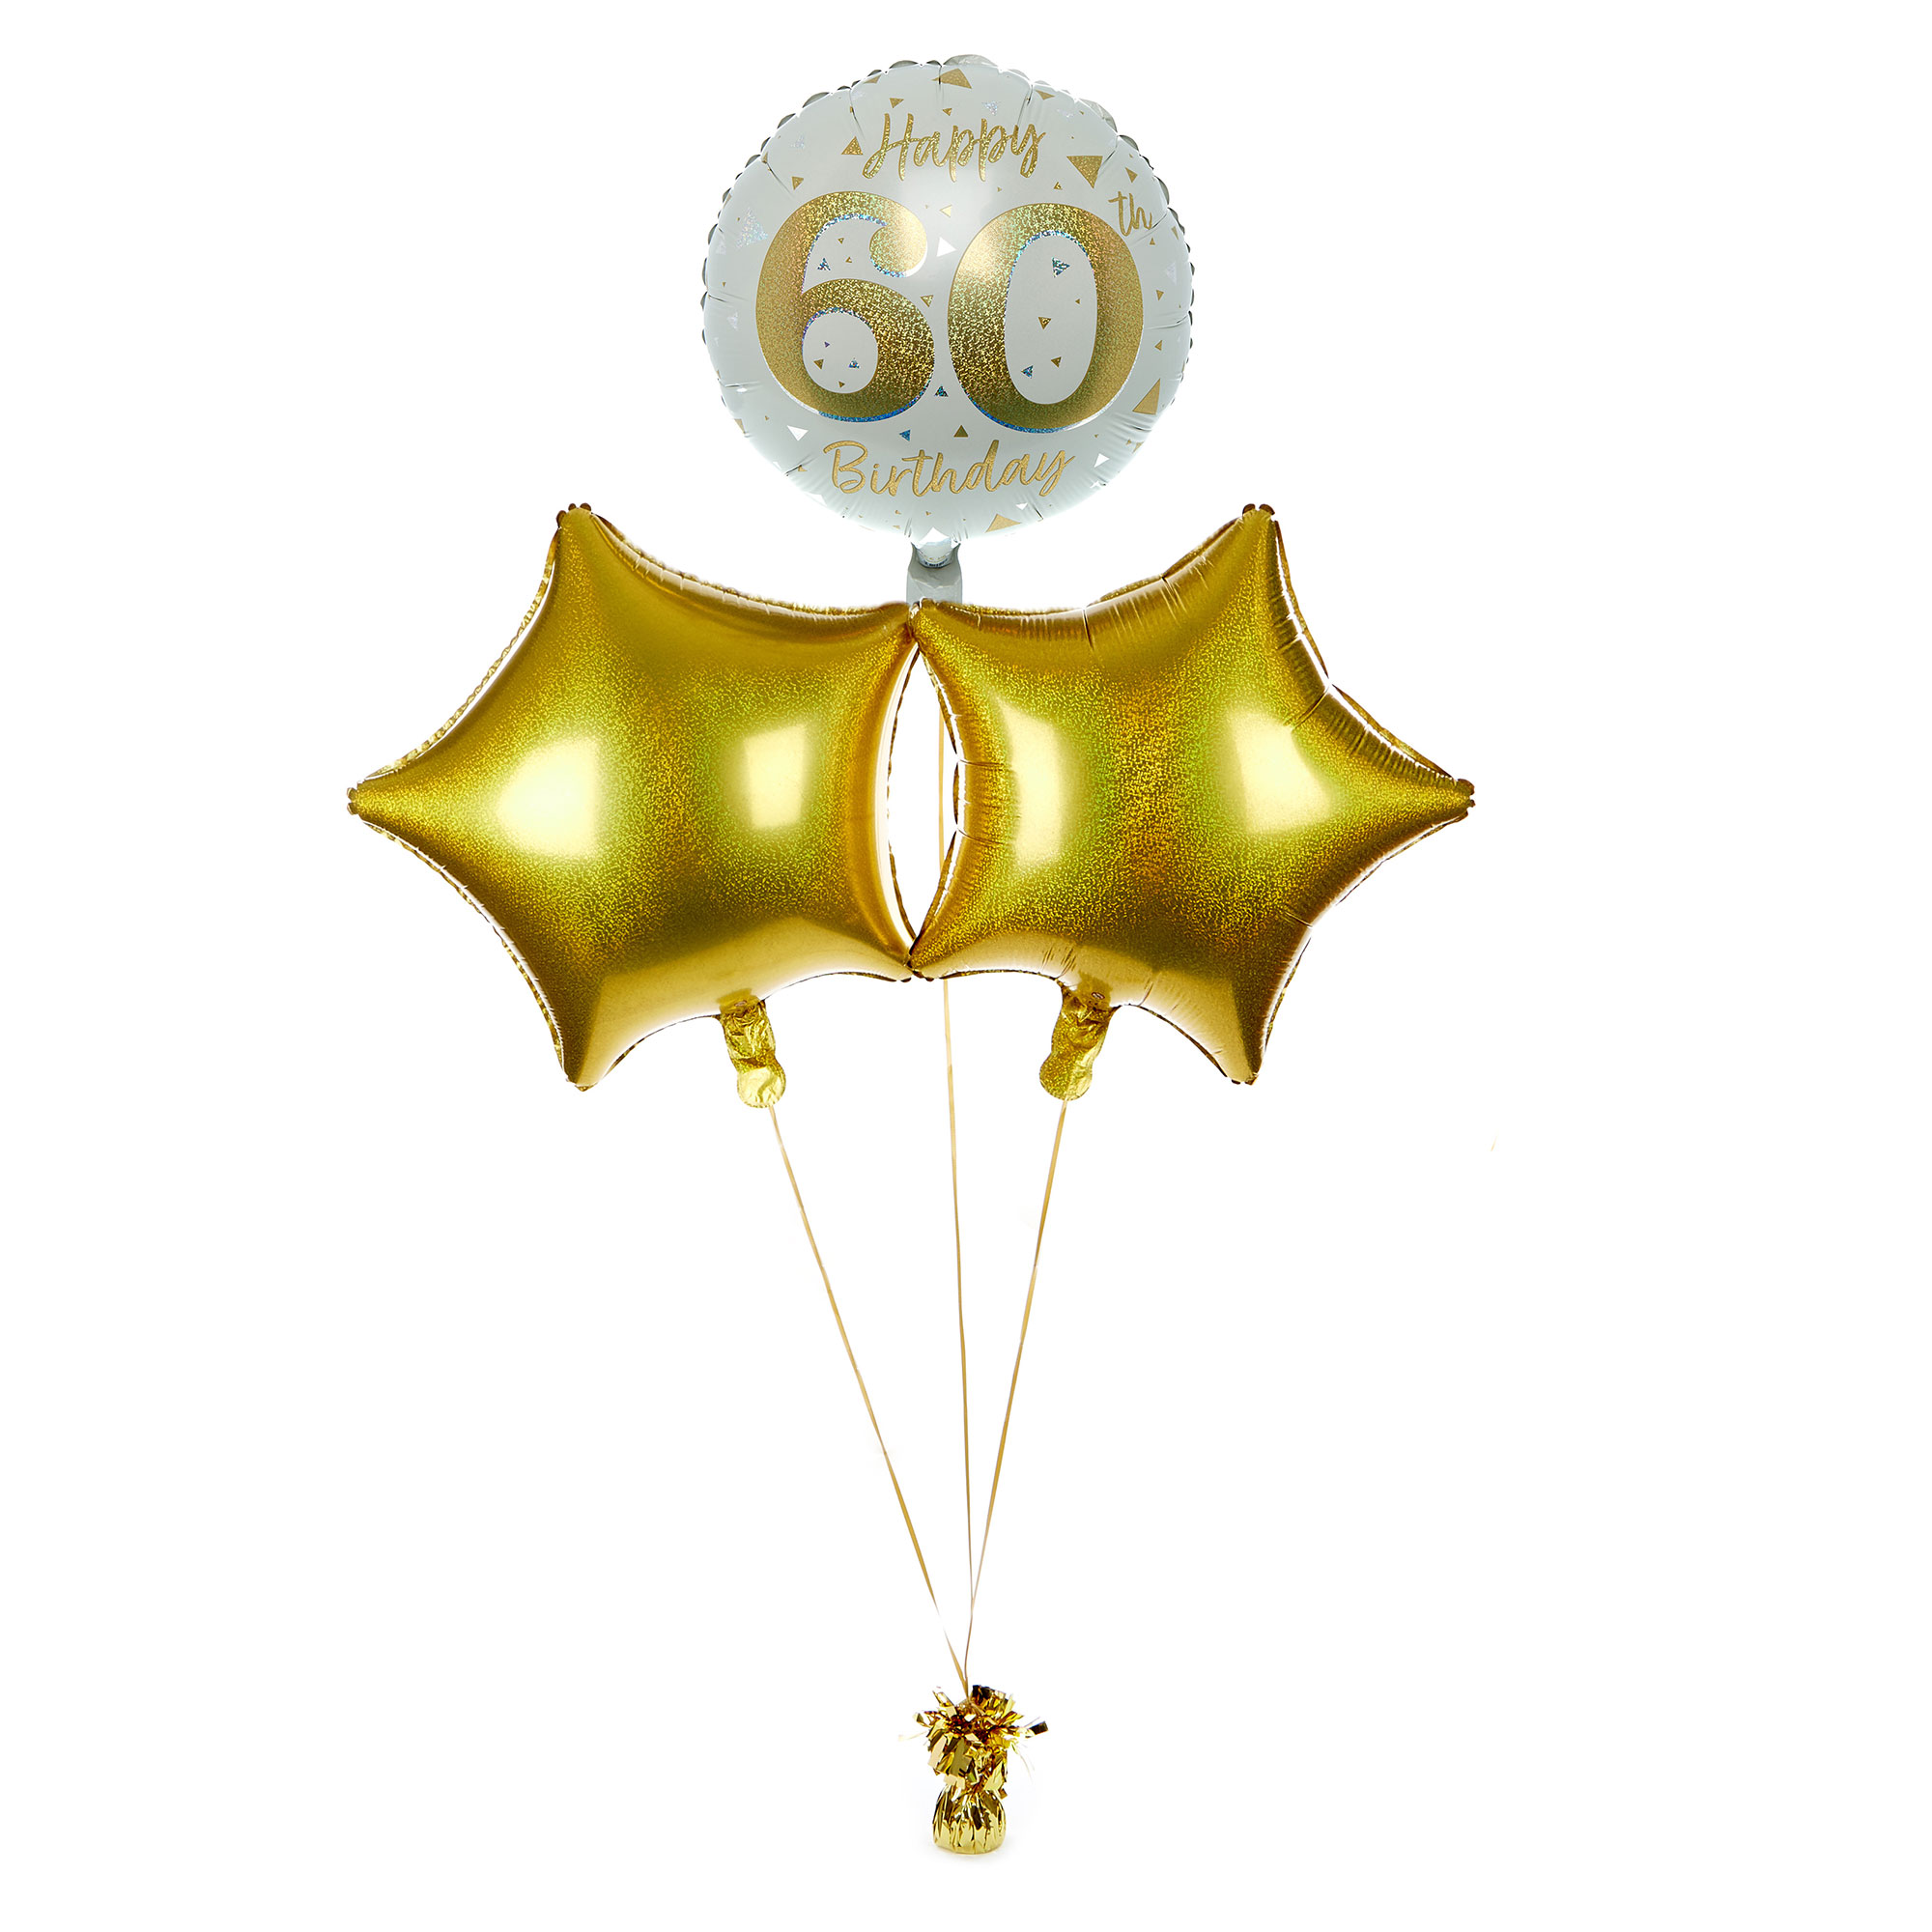 Happy 60th Birthday Balloon Bouquet - DELIVERED INFLATED!